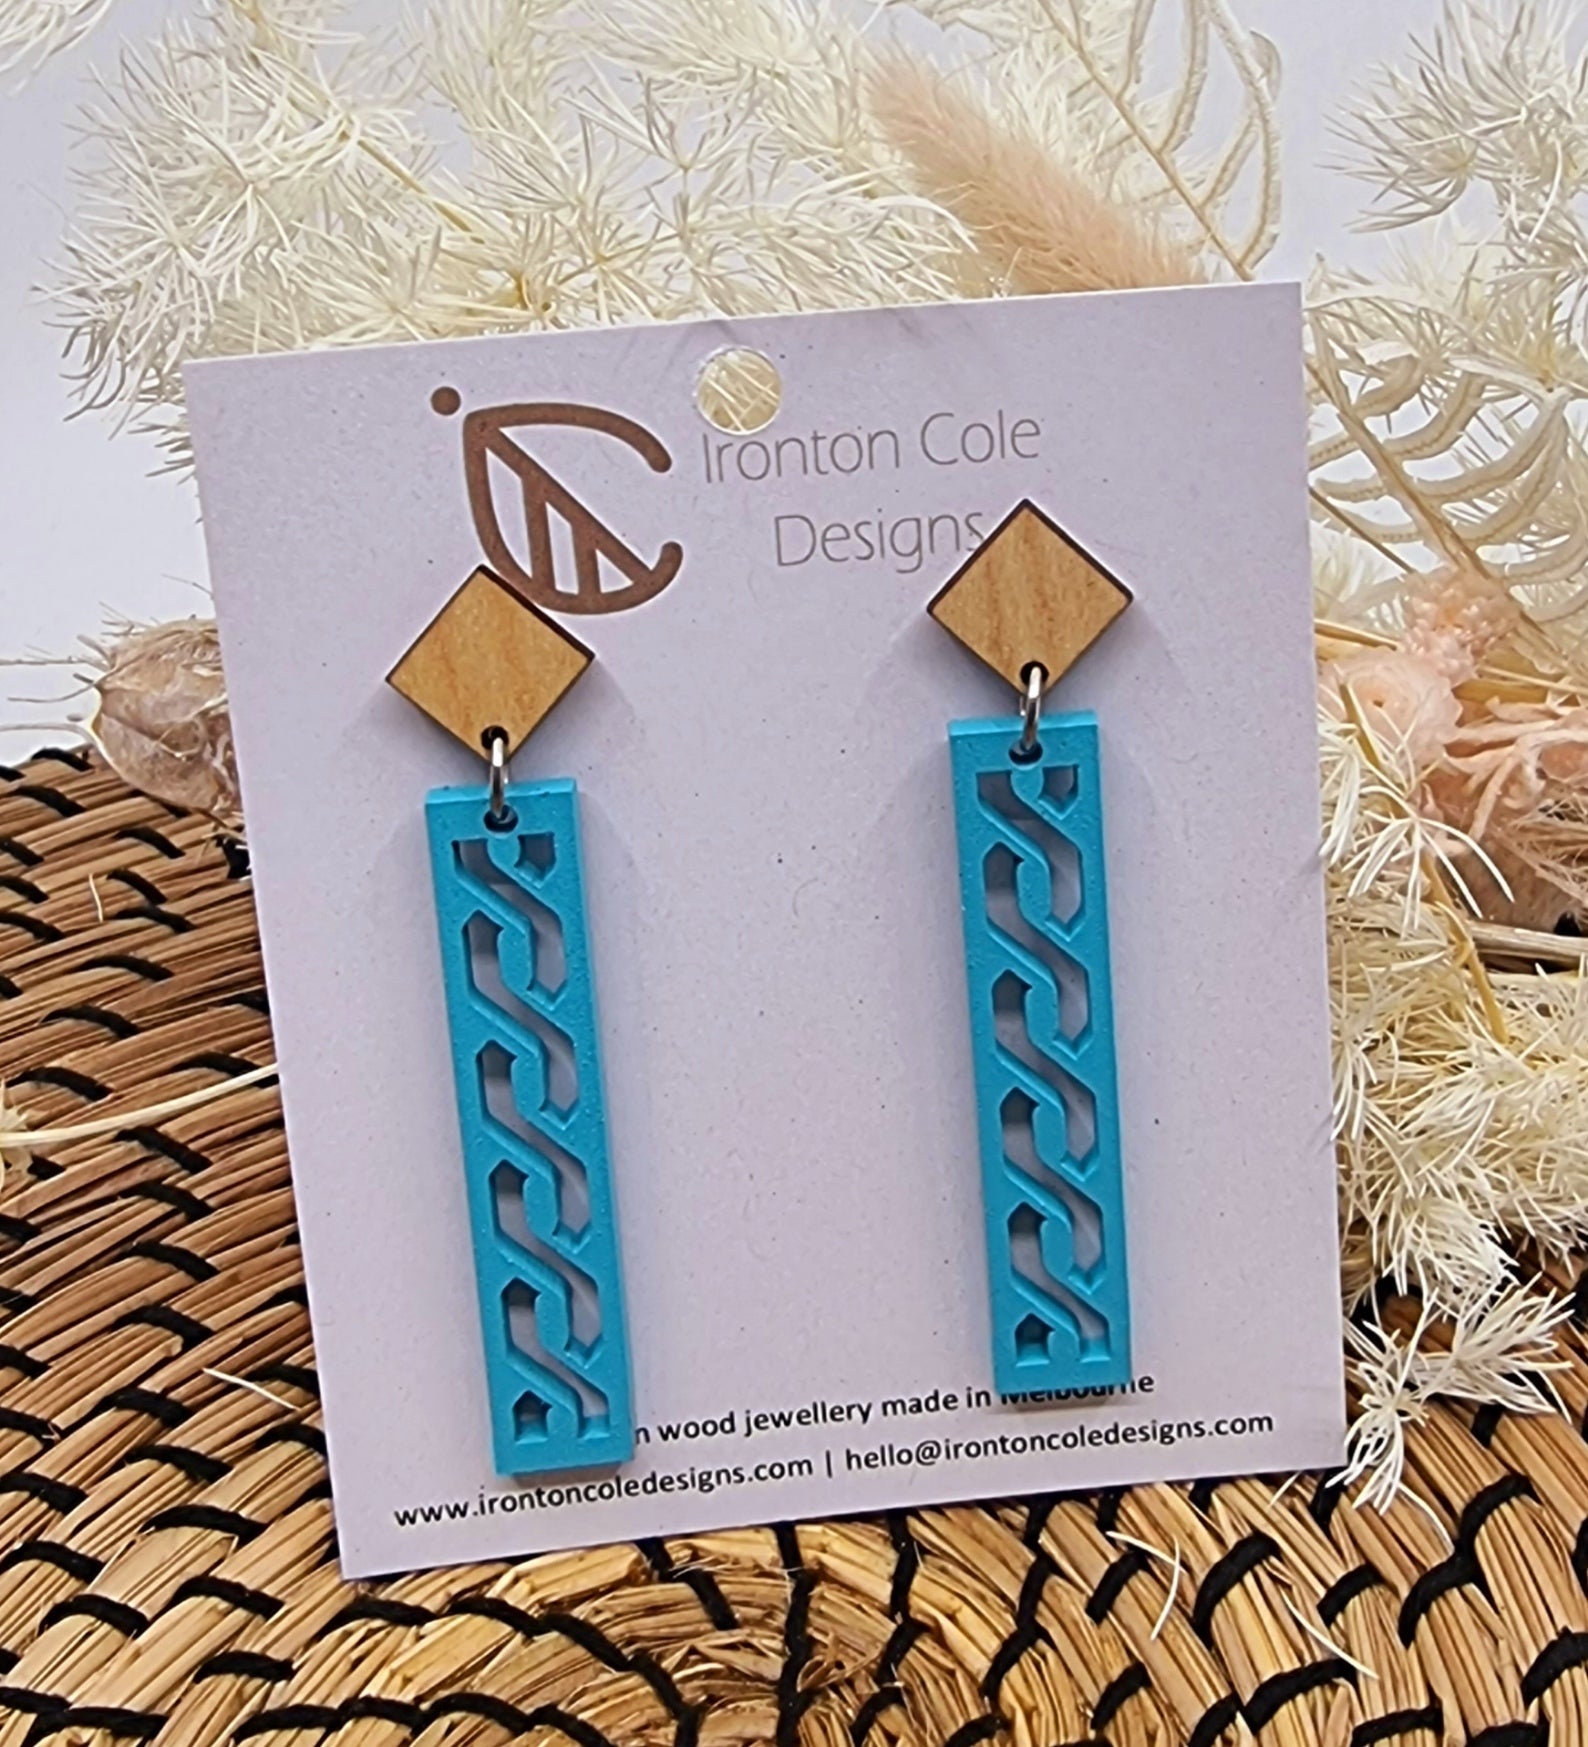 Baby blue painted wooden earrings in a shape of a bar with an s design.